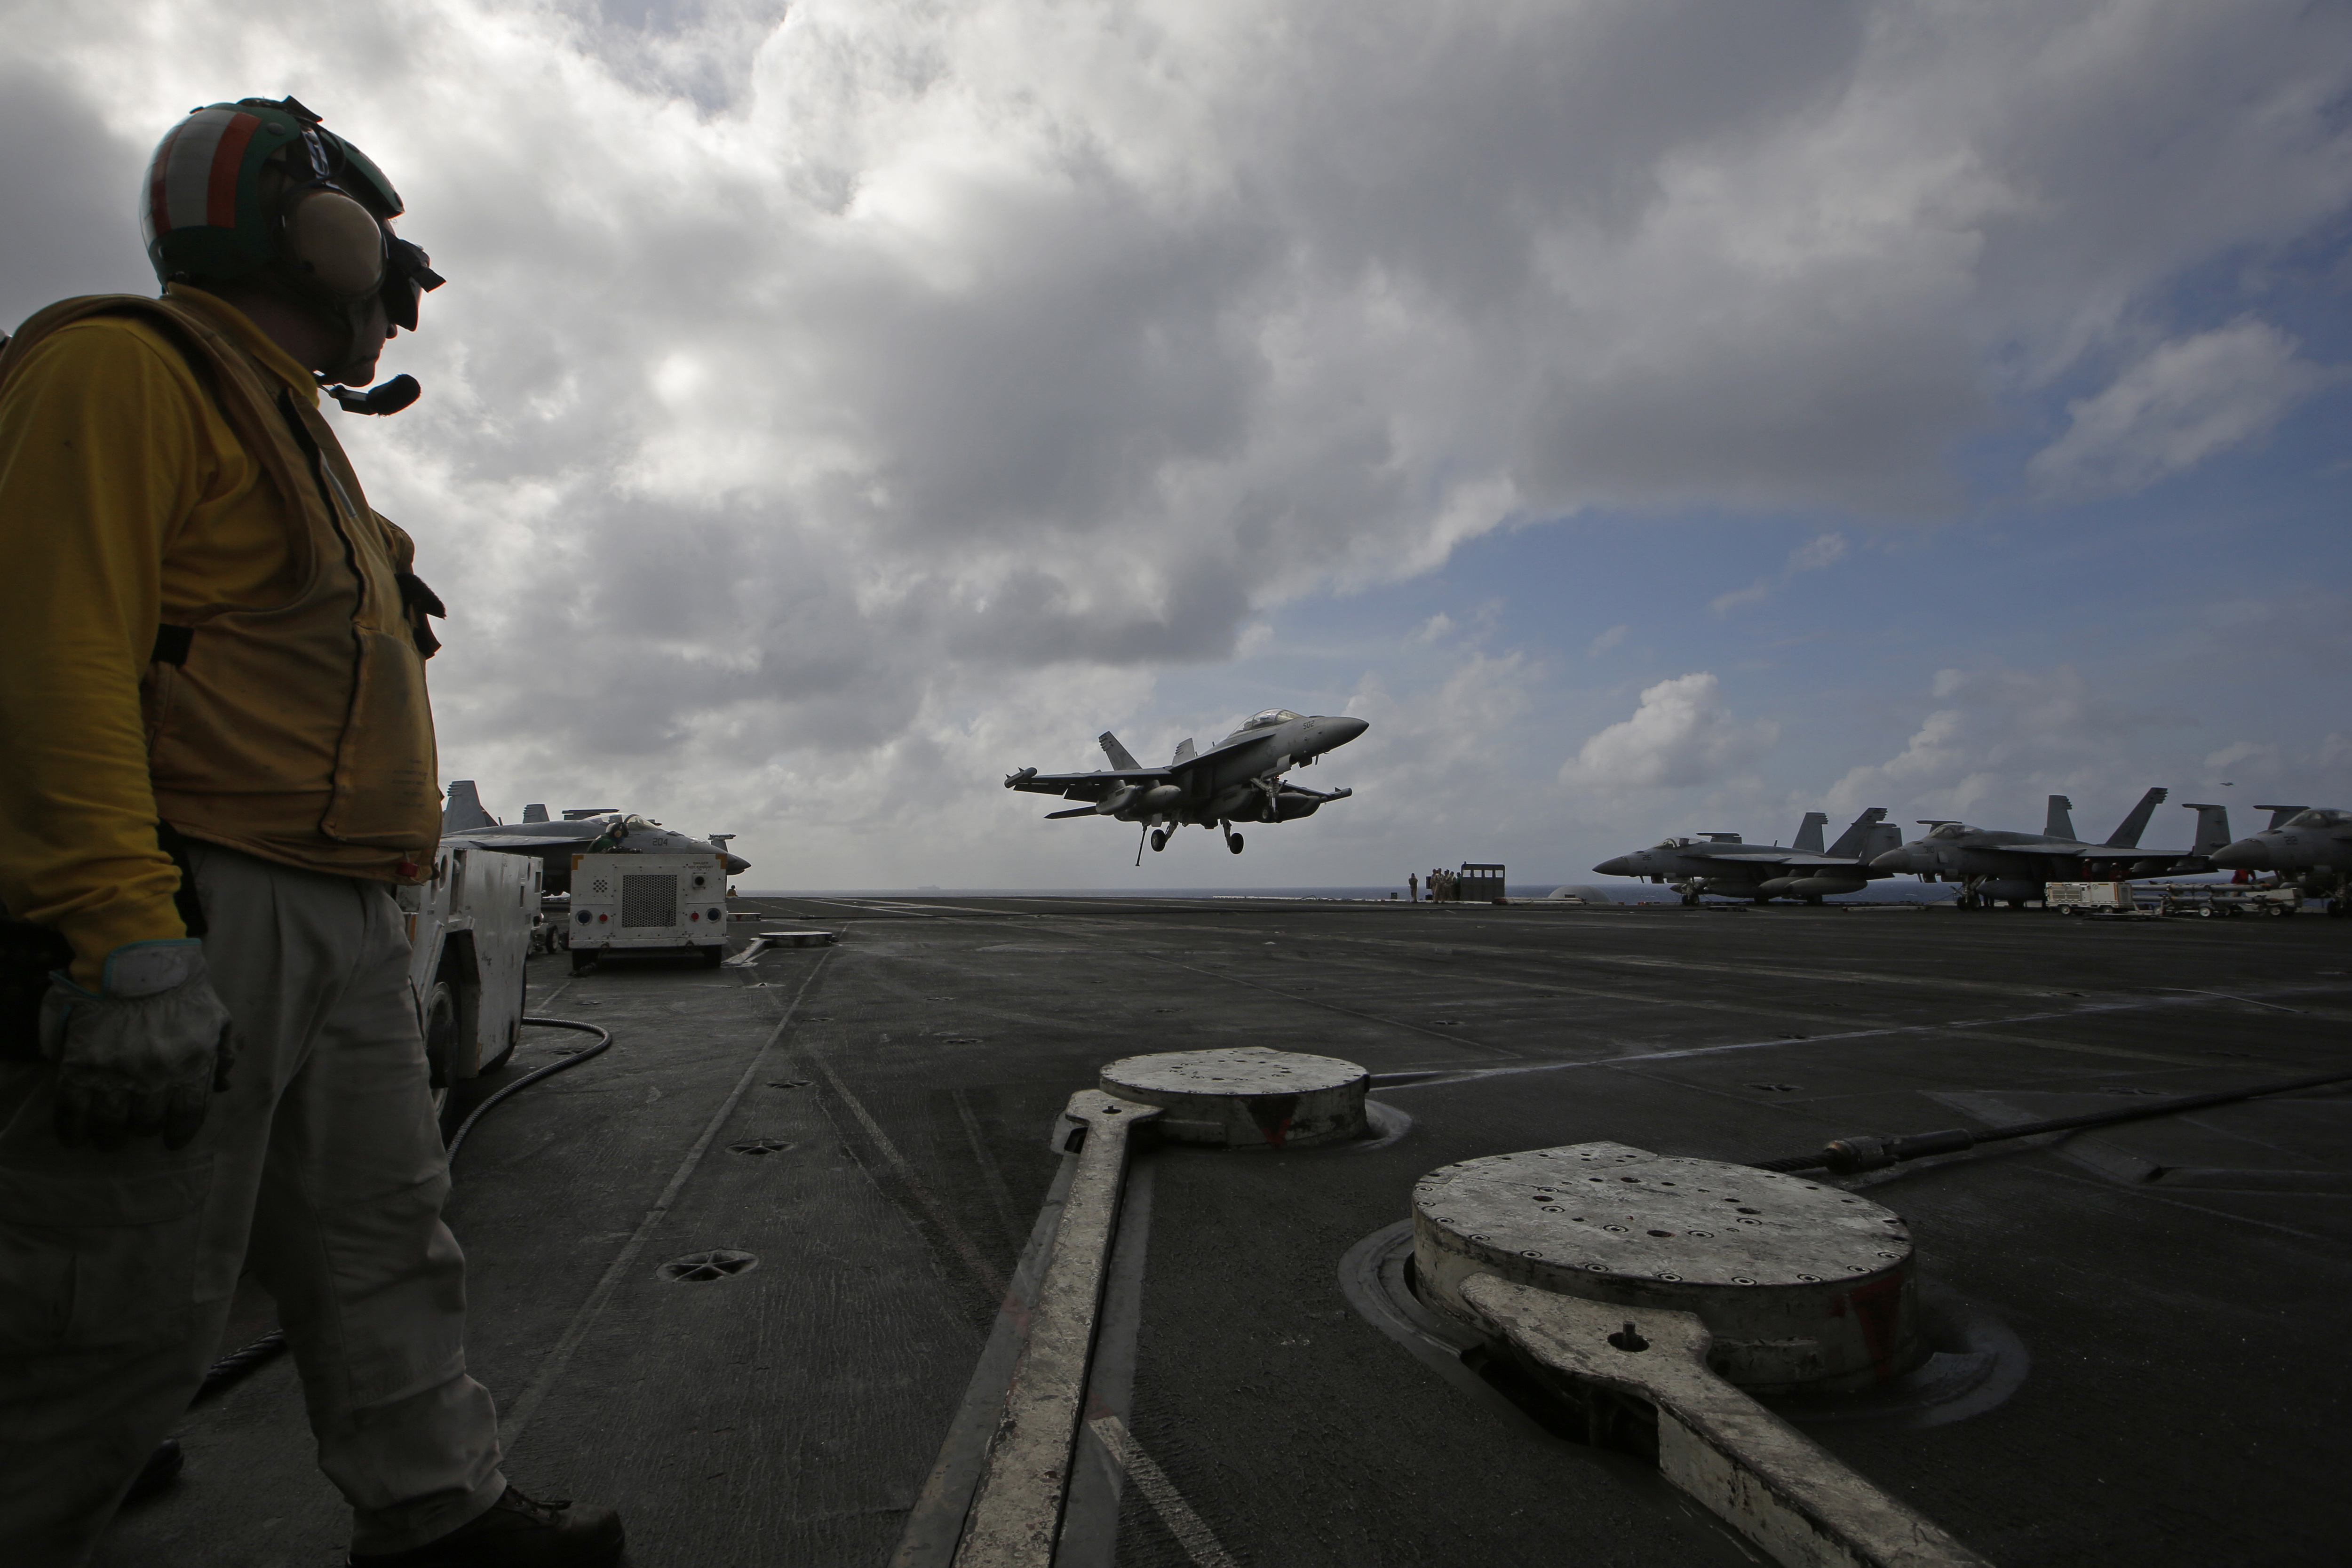 An F/A-18 Super Hornet fighter jet lands on the deck of the U.S. Navy USS Ronald Reagan in the South China Sea, Tuesday, Nov. 20, 2018. China is allowing USS Reagan and its battle group to make a port call in Hong Kong after it earlier turned down a similar request amid tensions with Washington. (AP Photo/Kin Cheung)